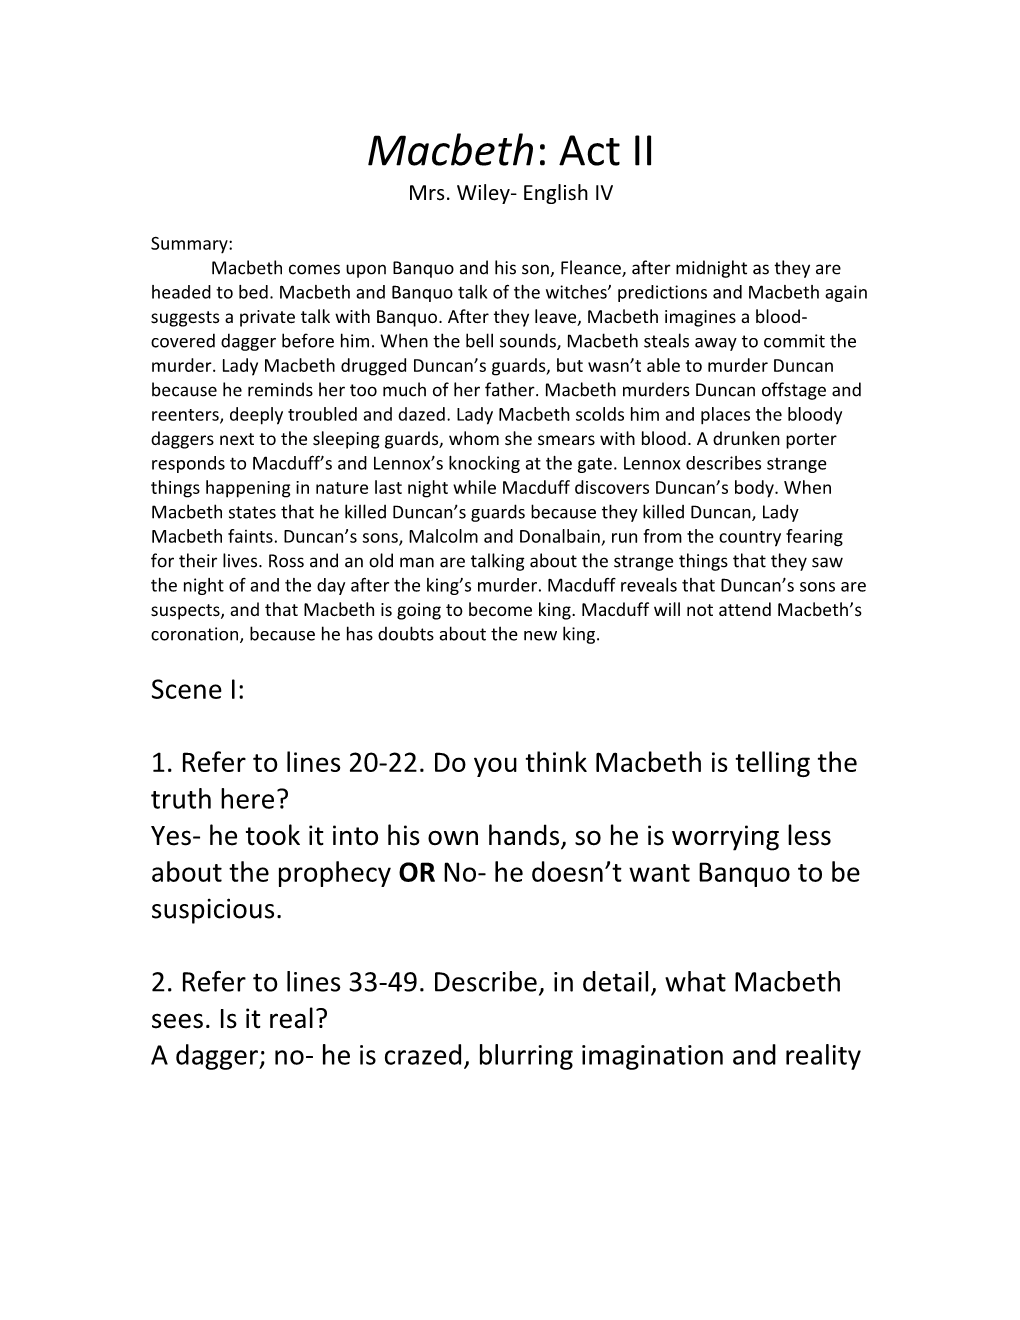 1. Refer to Lines 20-22. Do You Think Macbeth Is Telling the Truth Here?